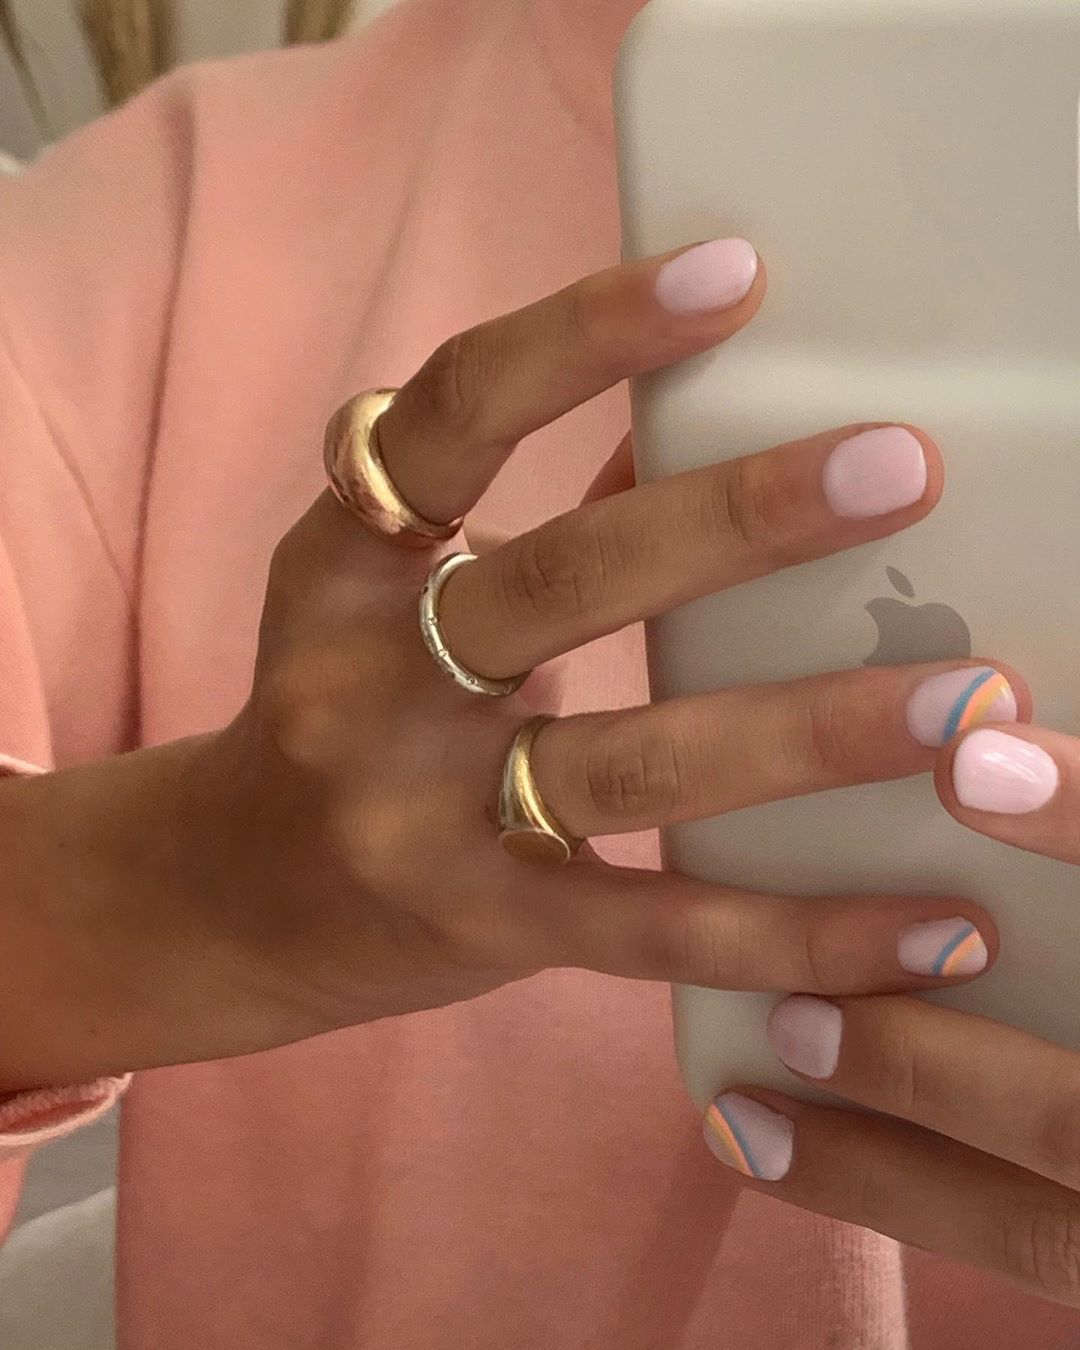 31 New Beauty Launches You Need To Check Out ASAP -   beauty Nails art